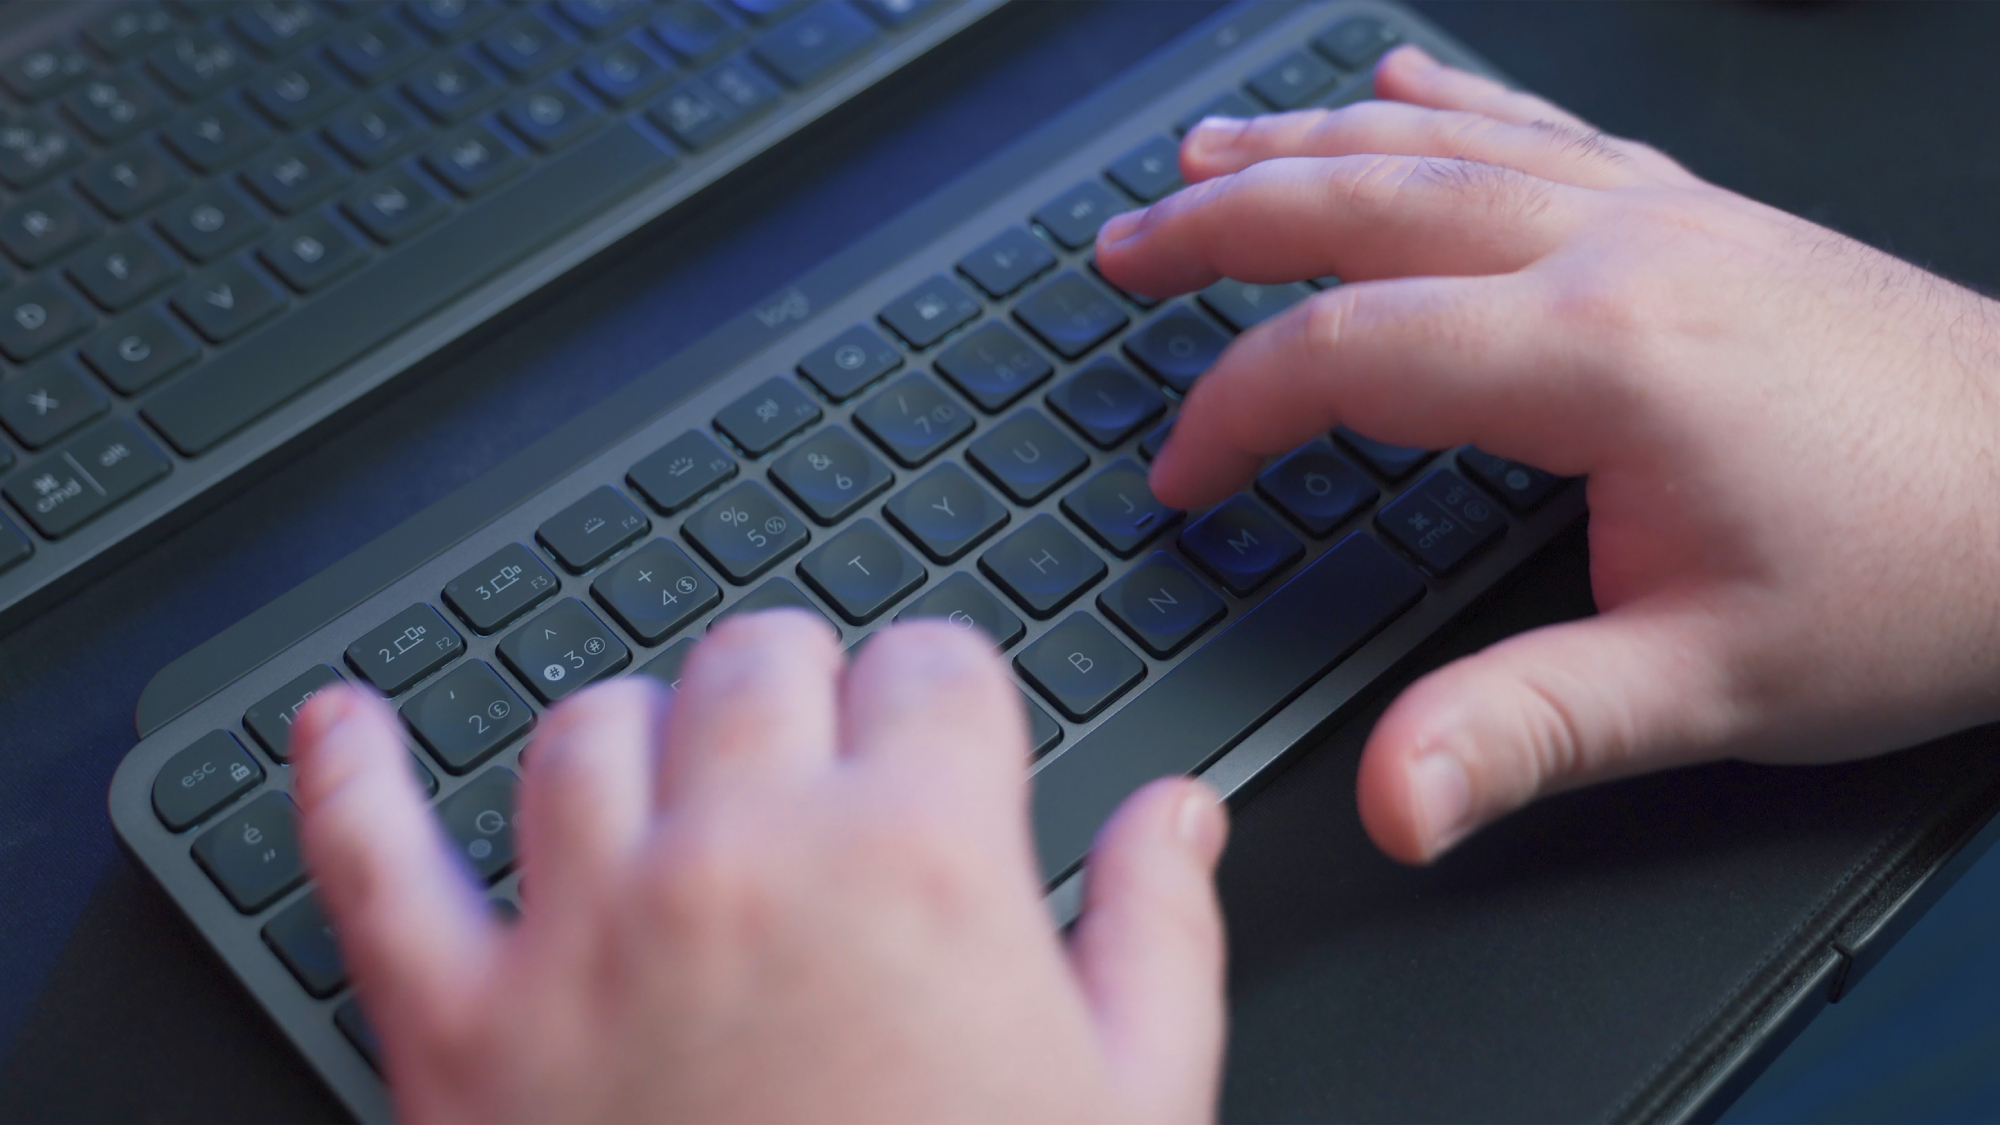 A person's hands on a smaller black keyboard in front of a larger black keyboard, perhaps figuring out how to use mouse keys to navigate their computer without a mouse.